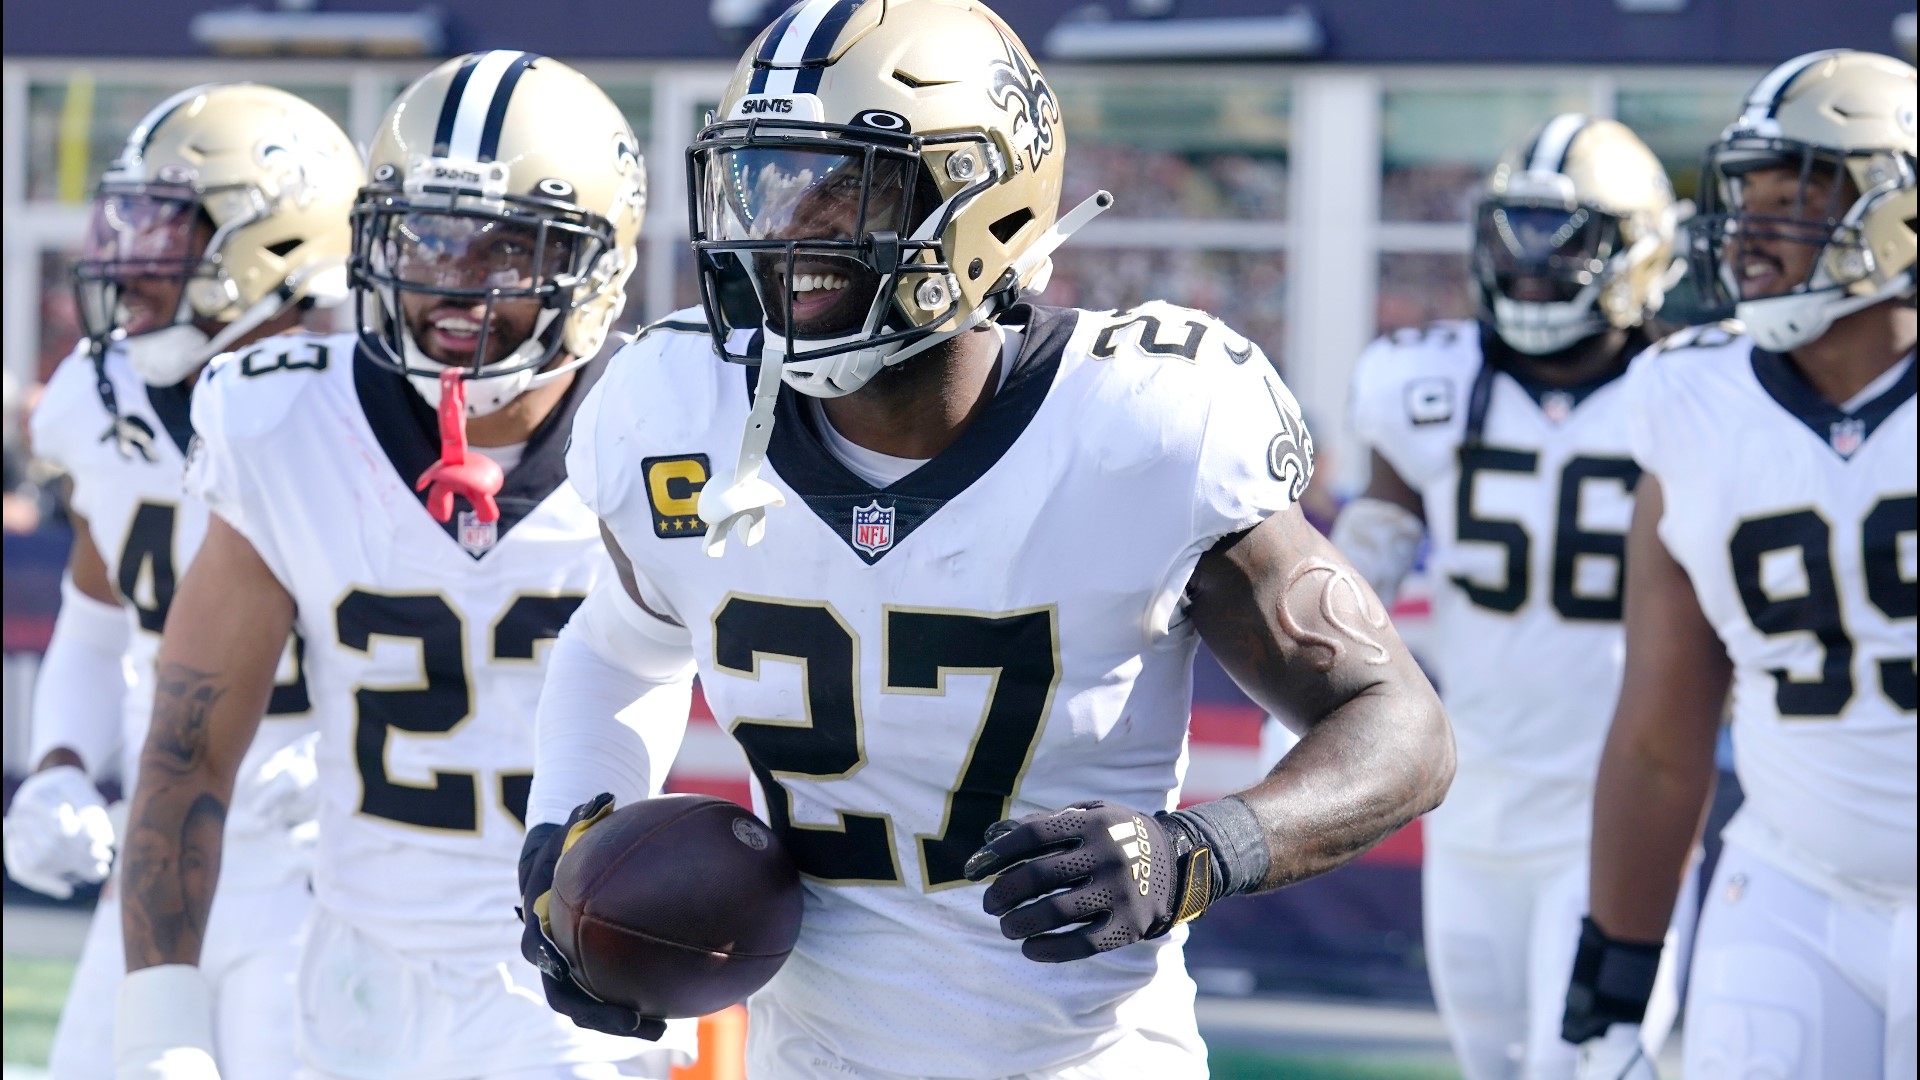 The Saints defeated the Patriots 28-13 and for the second time in 3 weeks relied on incredible defense, running the football, and avoiding turnovers to get a victory